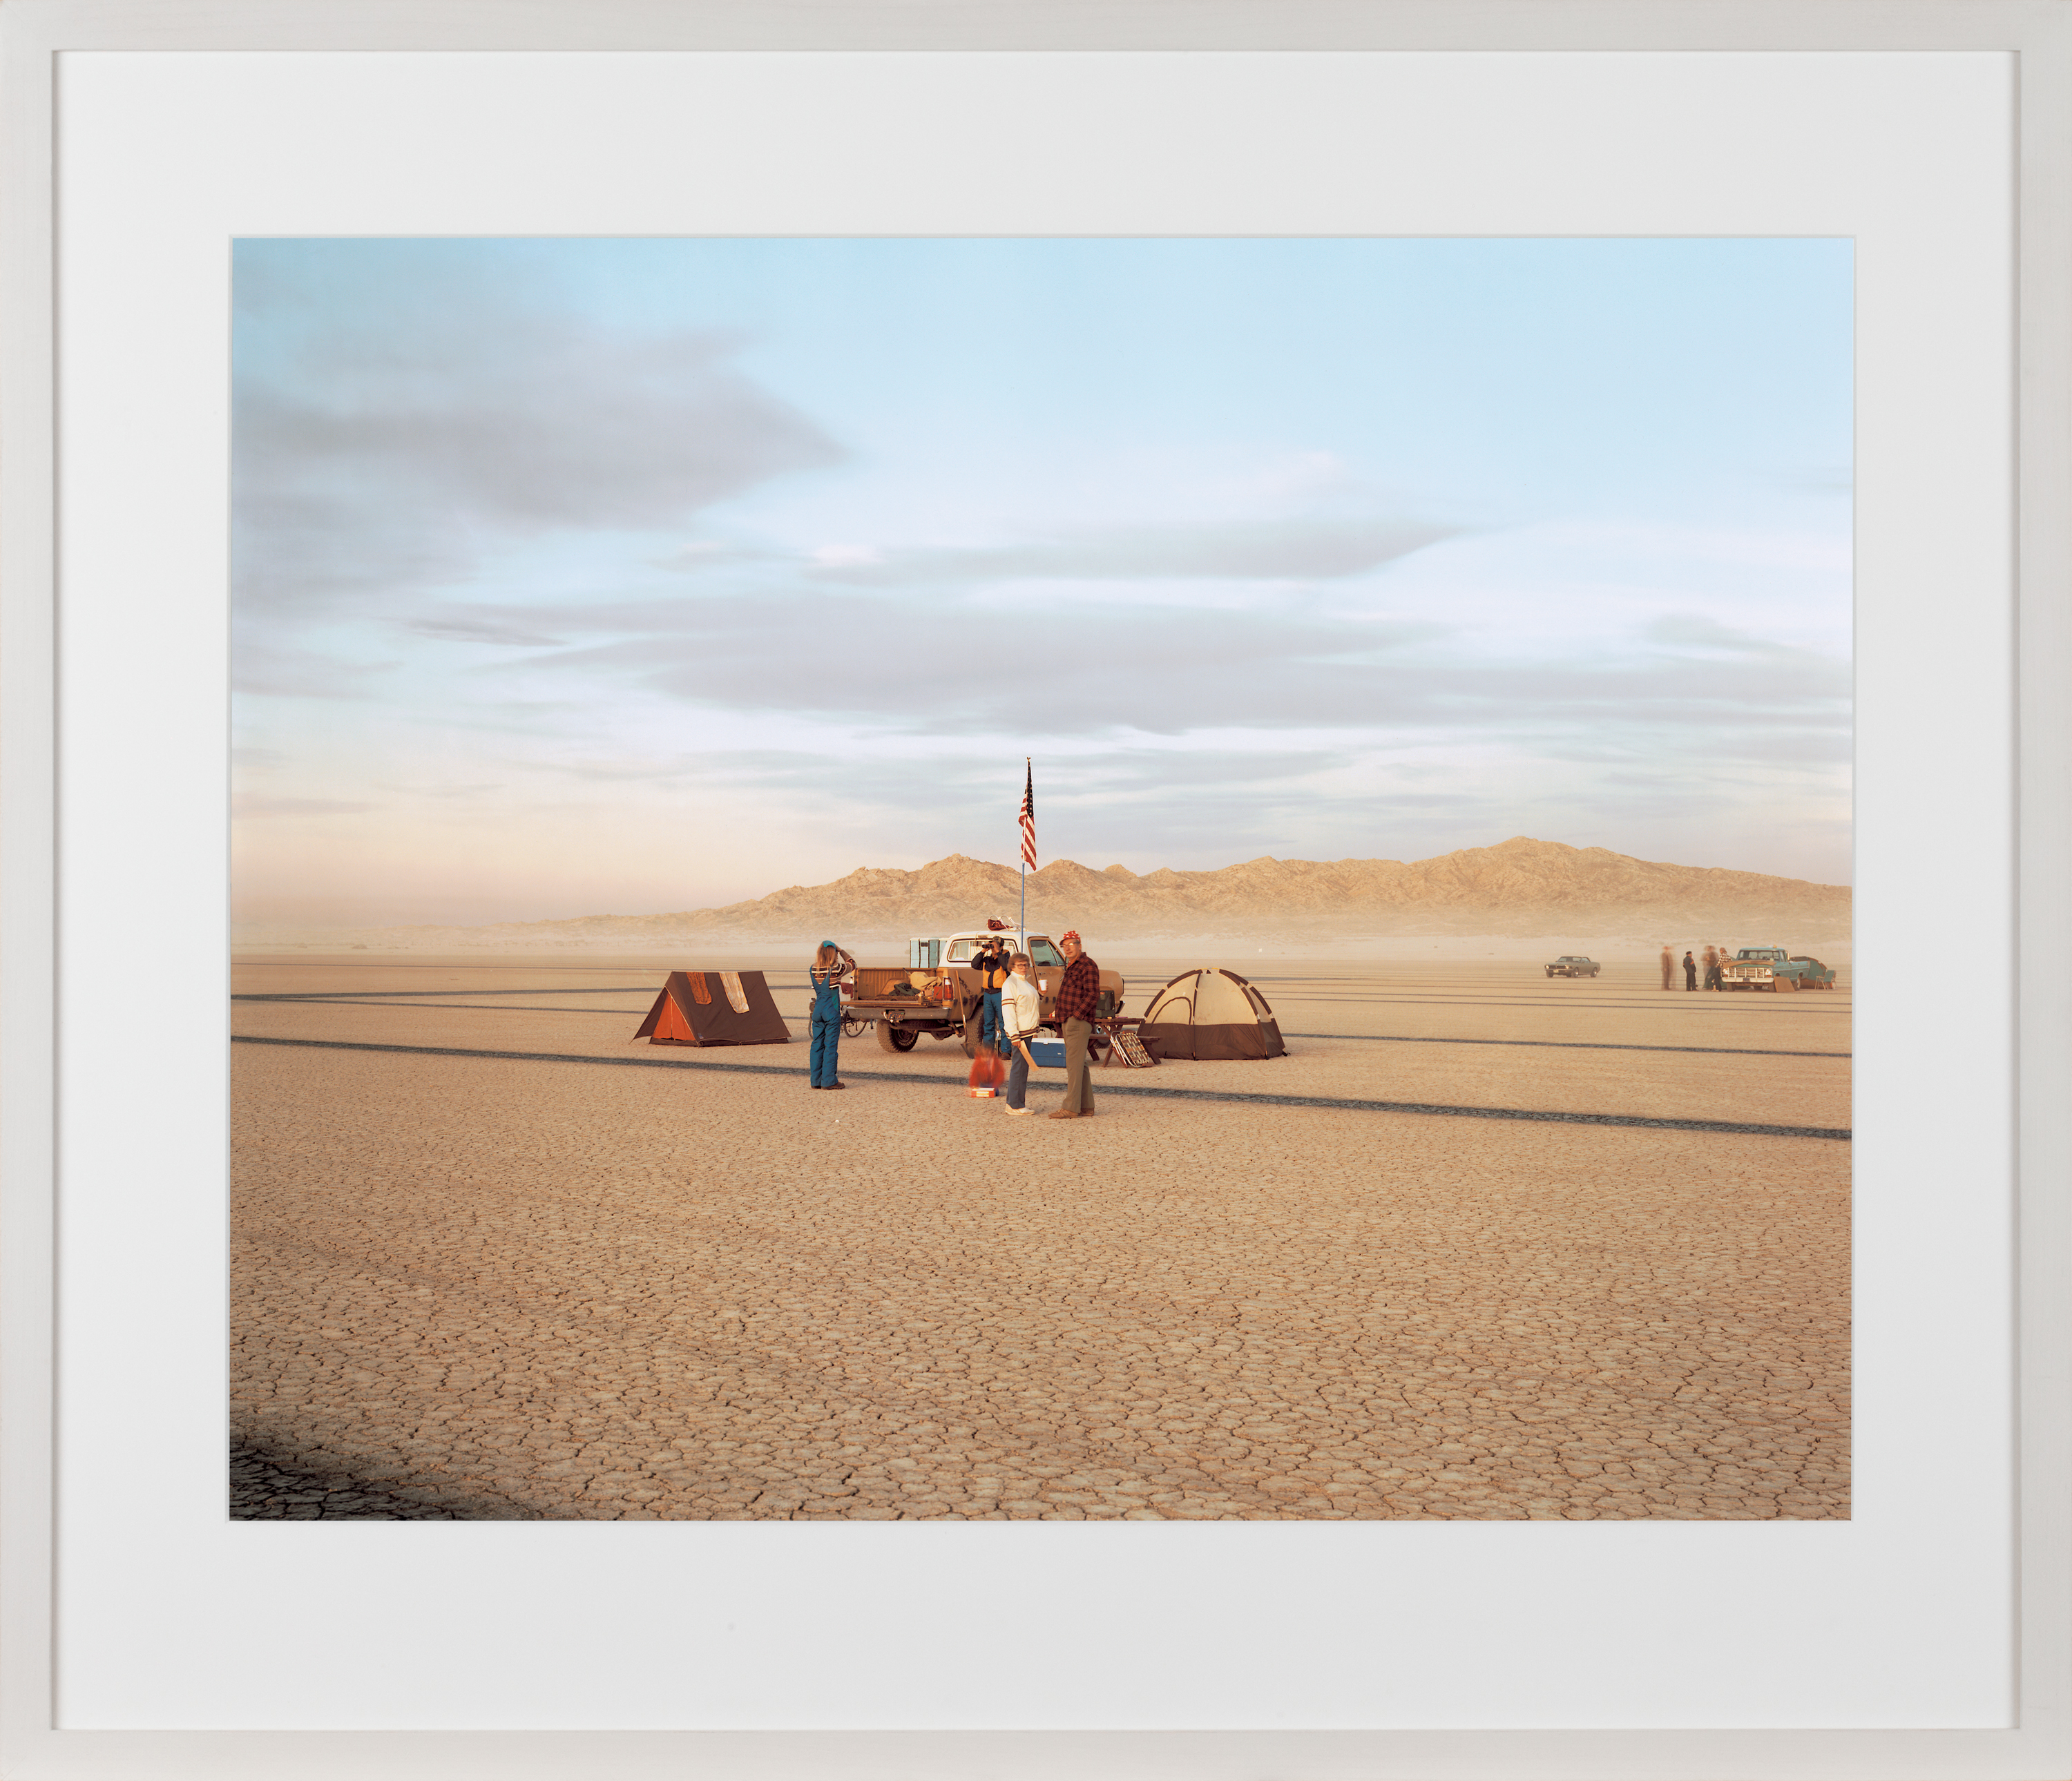 Color image of a color photograph depicting figures in the middle of a desert near tents and cars framed in white